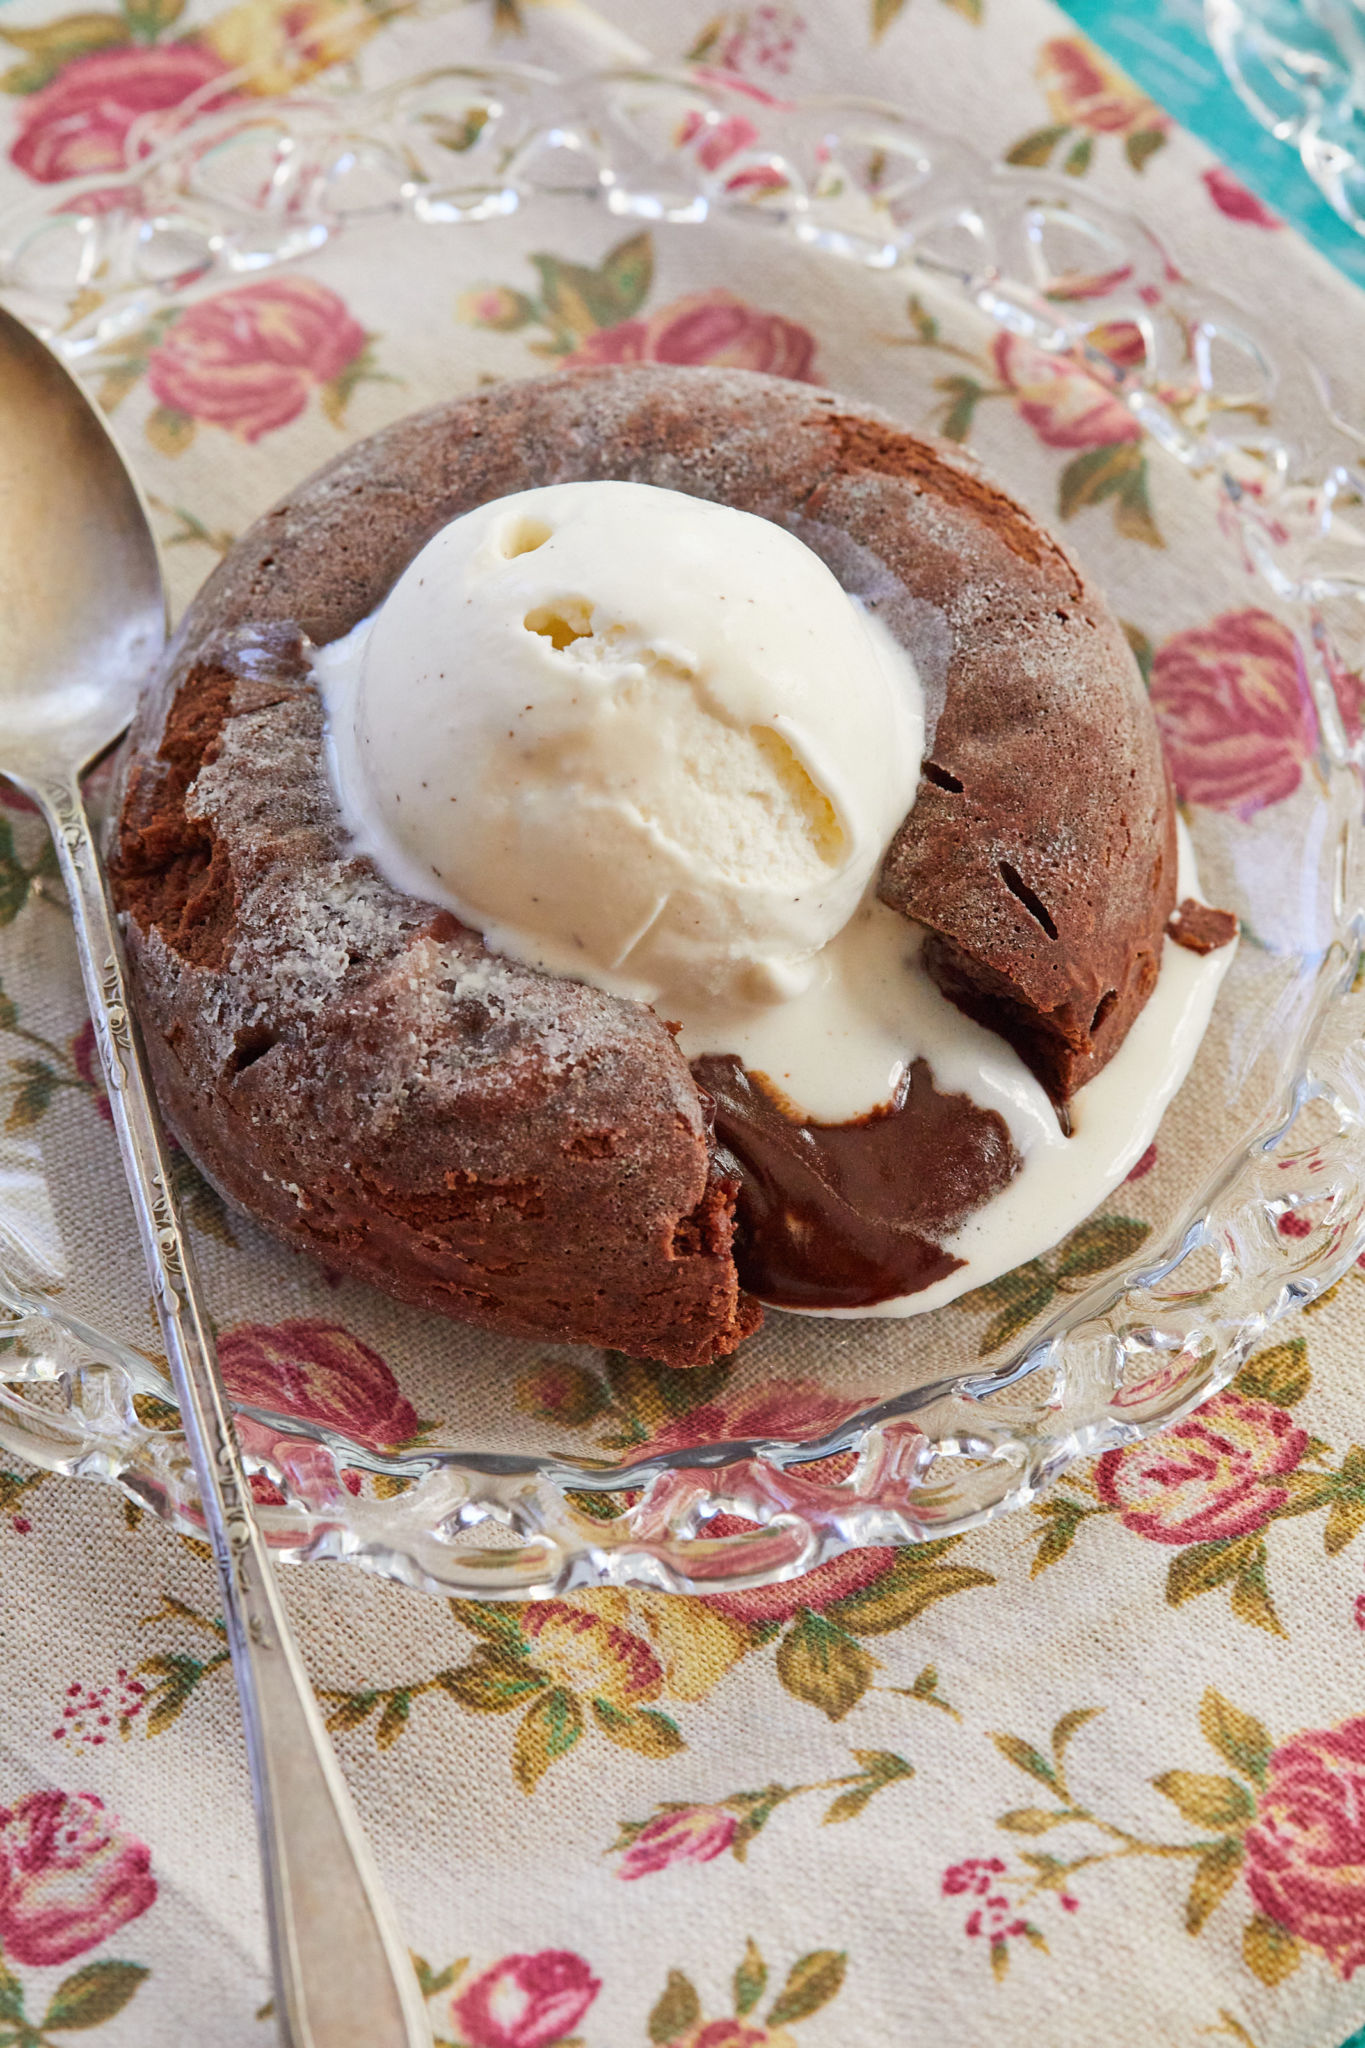 A Chocolate Lava Cake recipe that makes two, topped with vanilla ice cream!